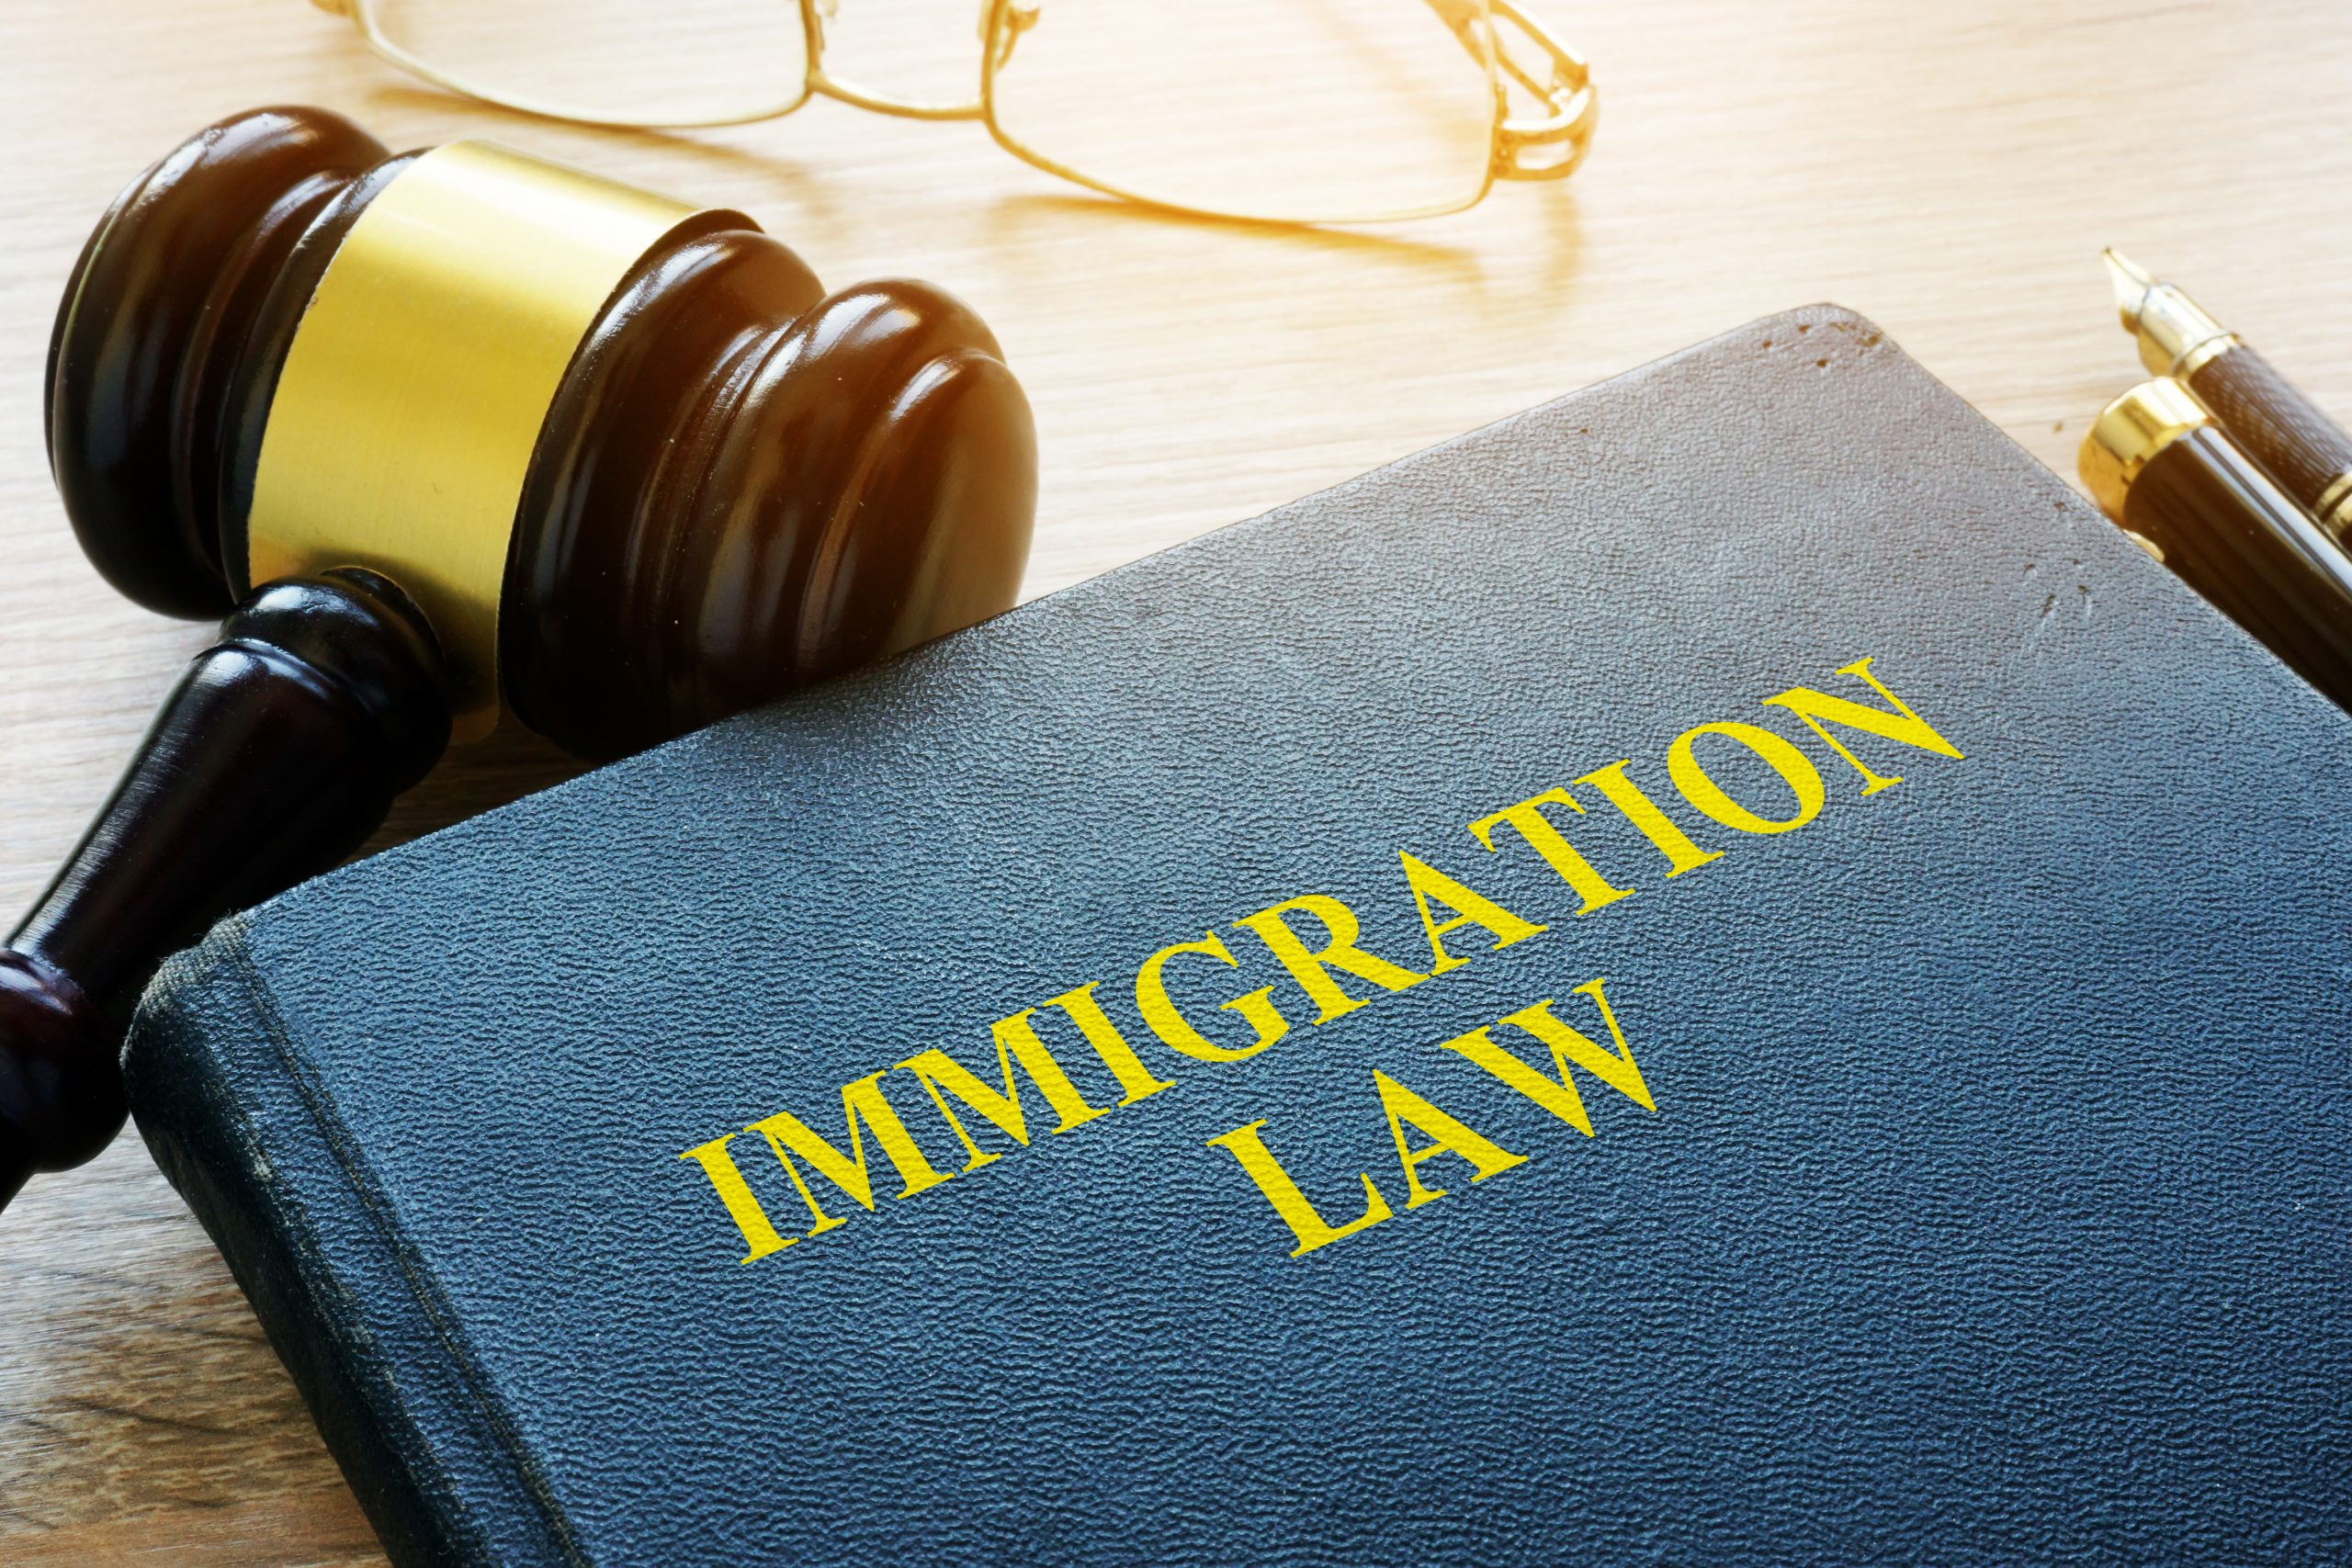 2 Things You Need To Know About The Country's Immigration Laws The Student Lawyer